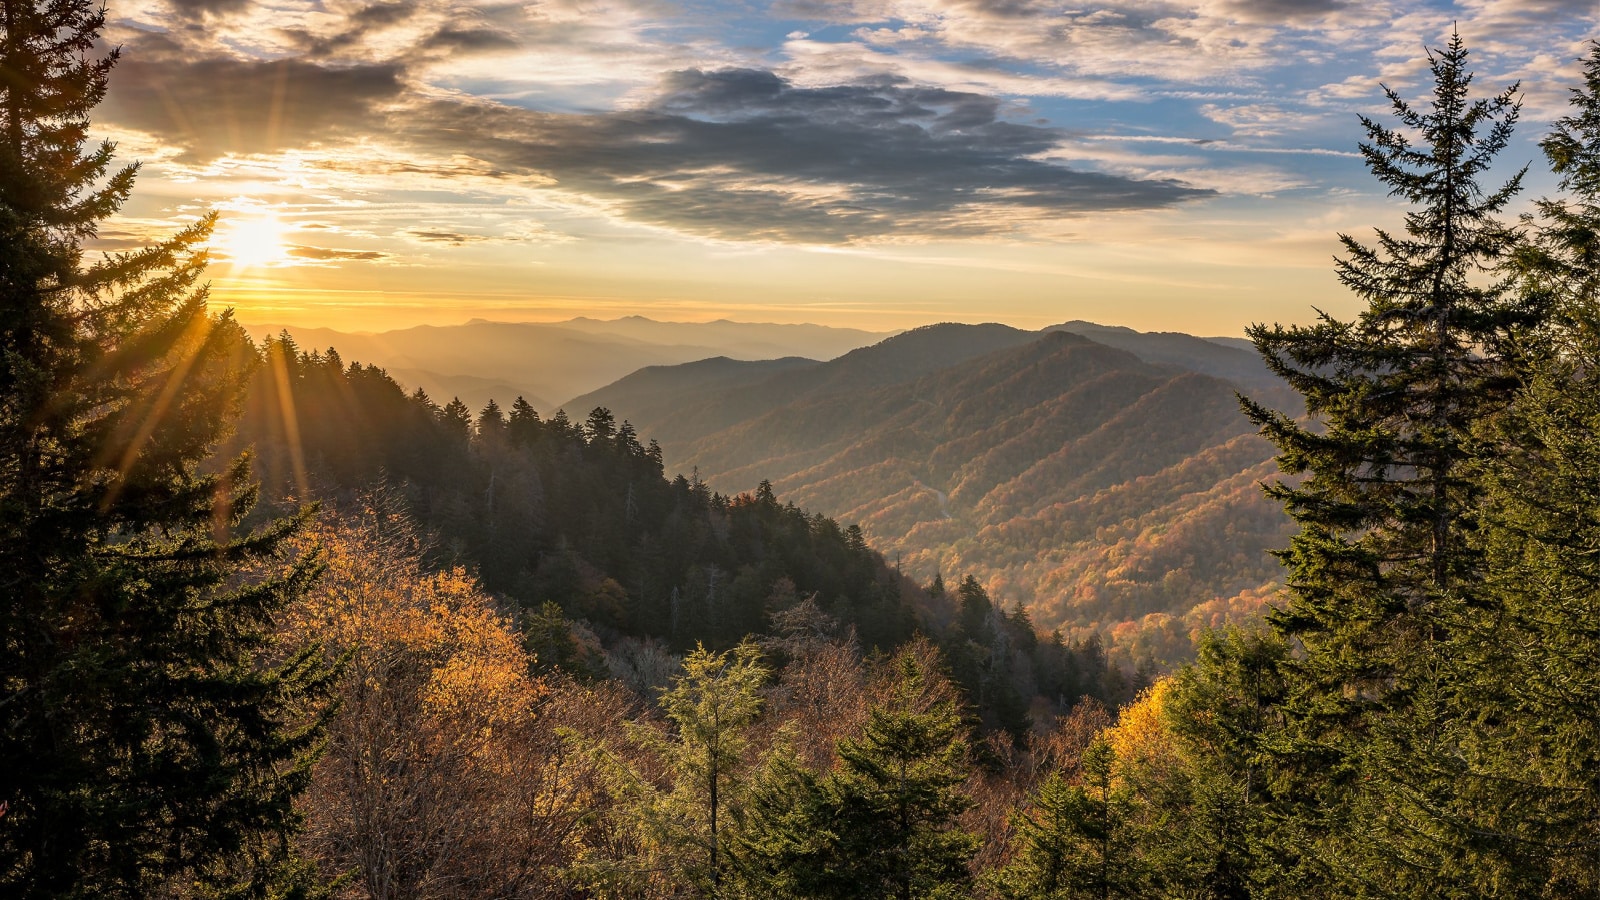 Autumn sunrise over Newfound Gap overlook in the Great Smoky Mountains